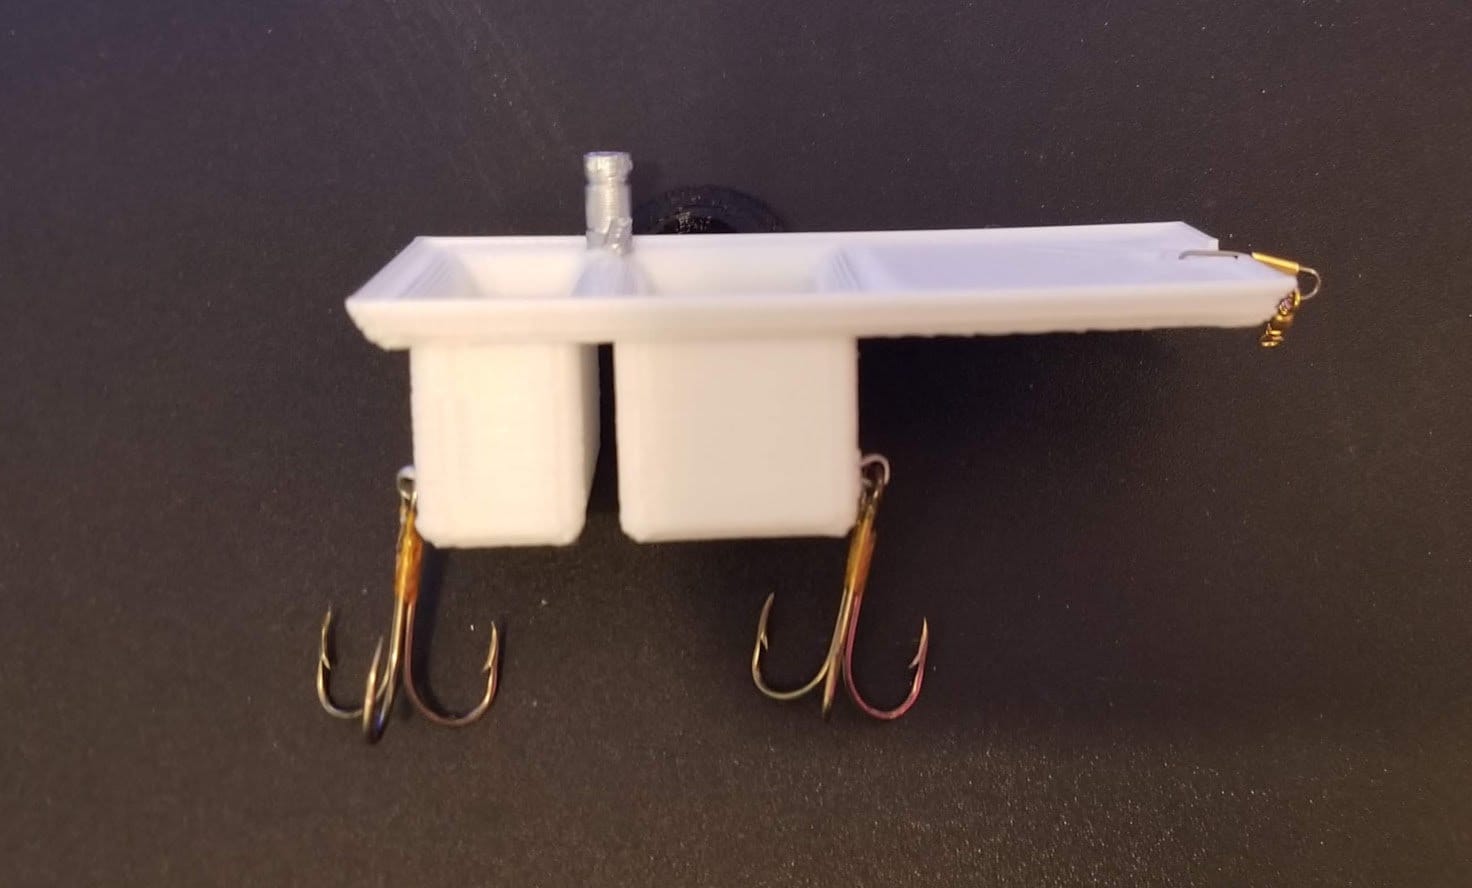 The Kitchen Sink fishing Lure 